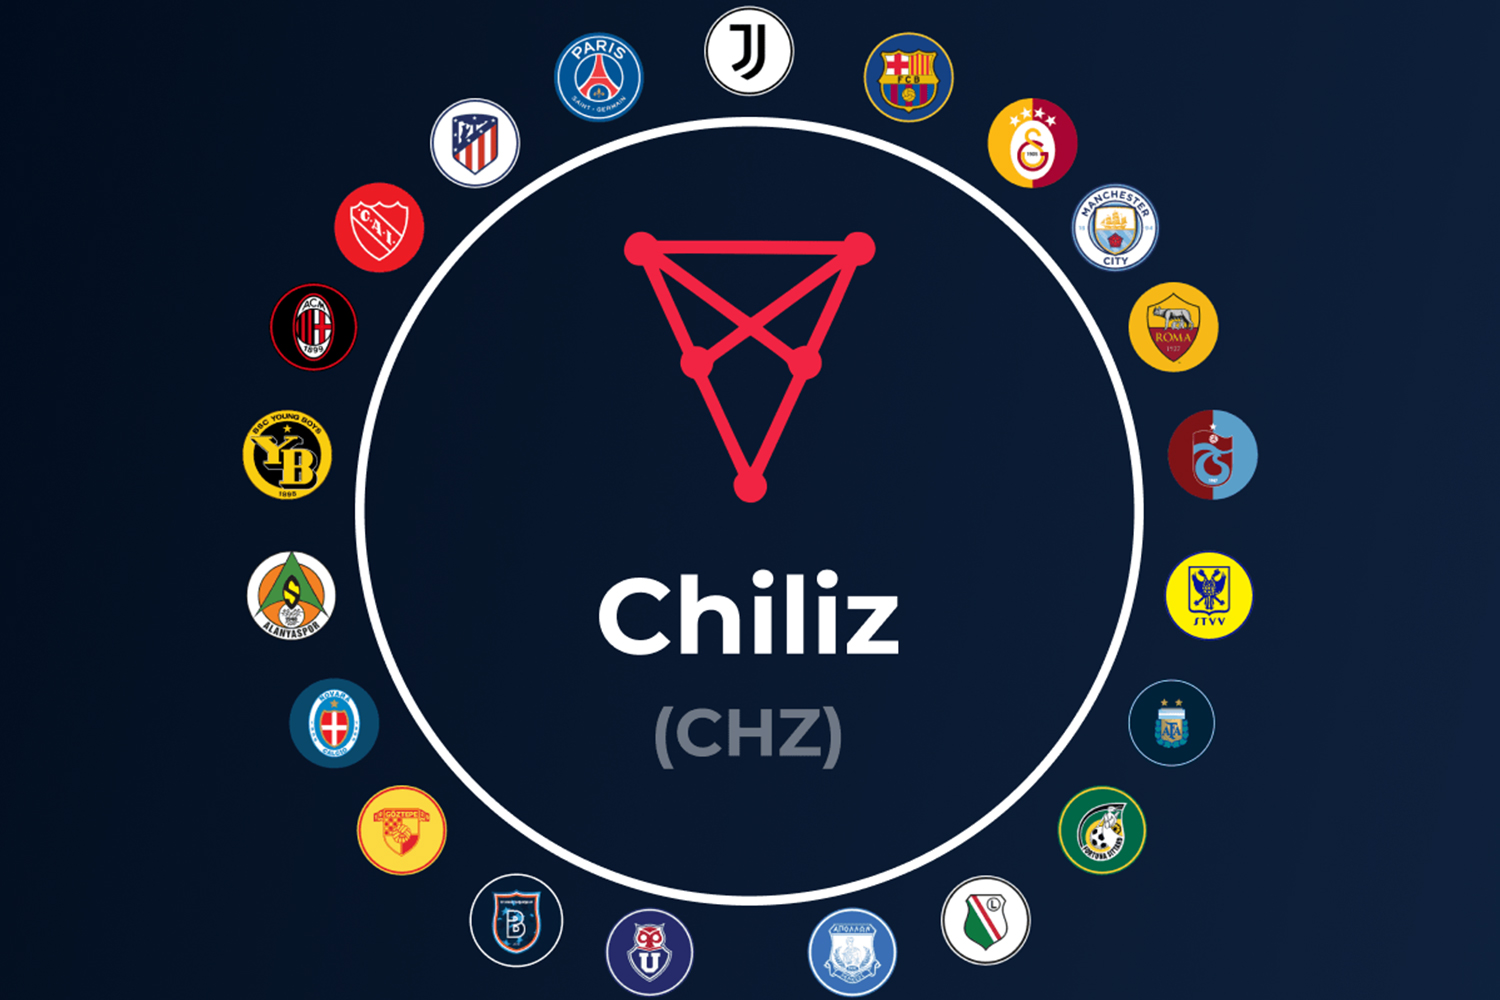 Chiliz price grew by more than 4,350% from $0.02 on 1 January 2021 to its all-time high of $0.89 on 13 March 2021